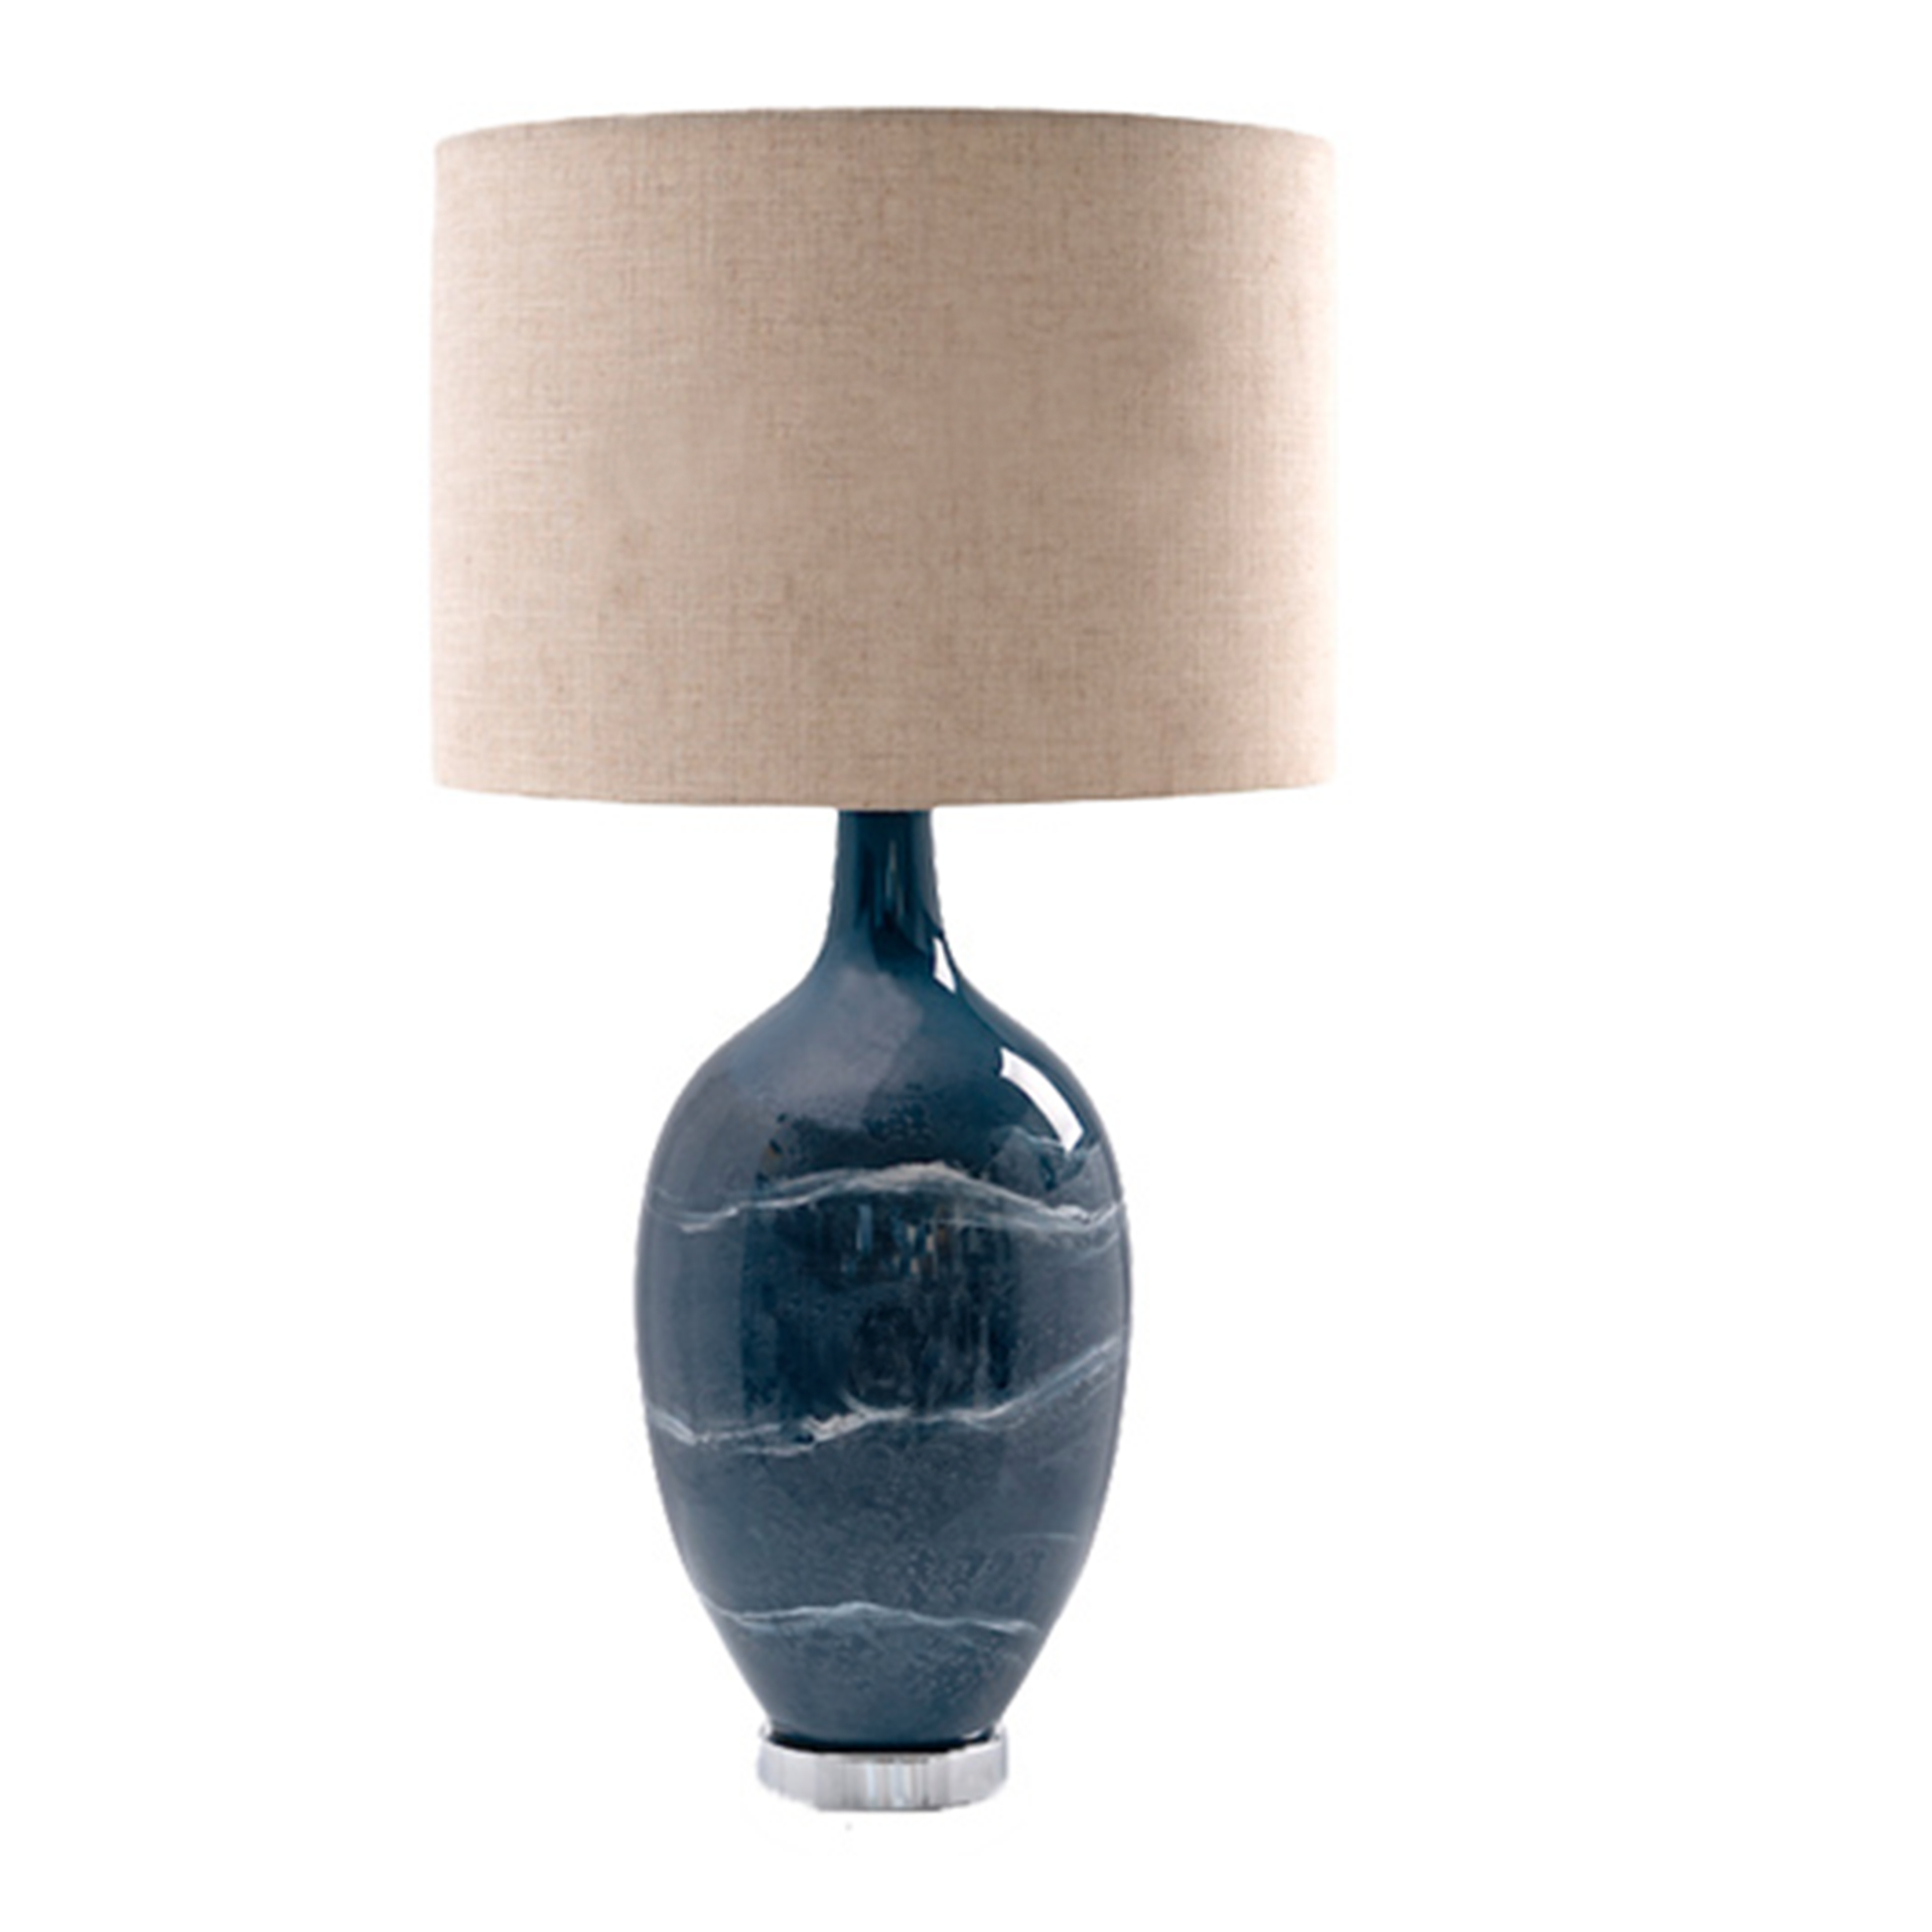 Hand-painted lacquer table lamp abstract design | Sourcing Vietnam